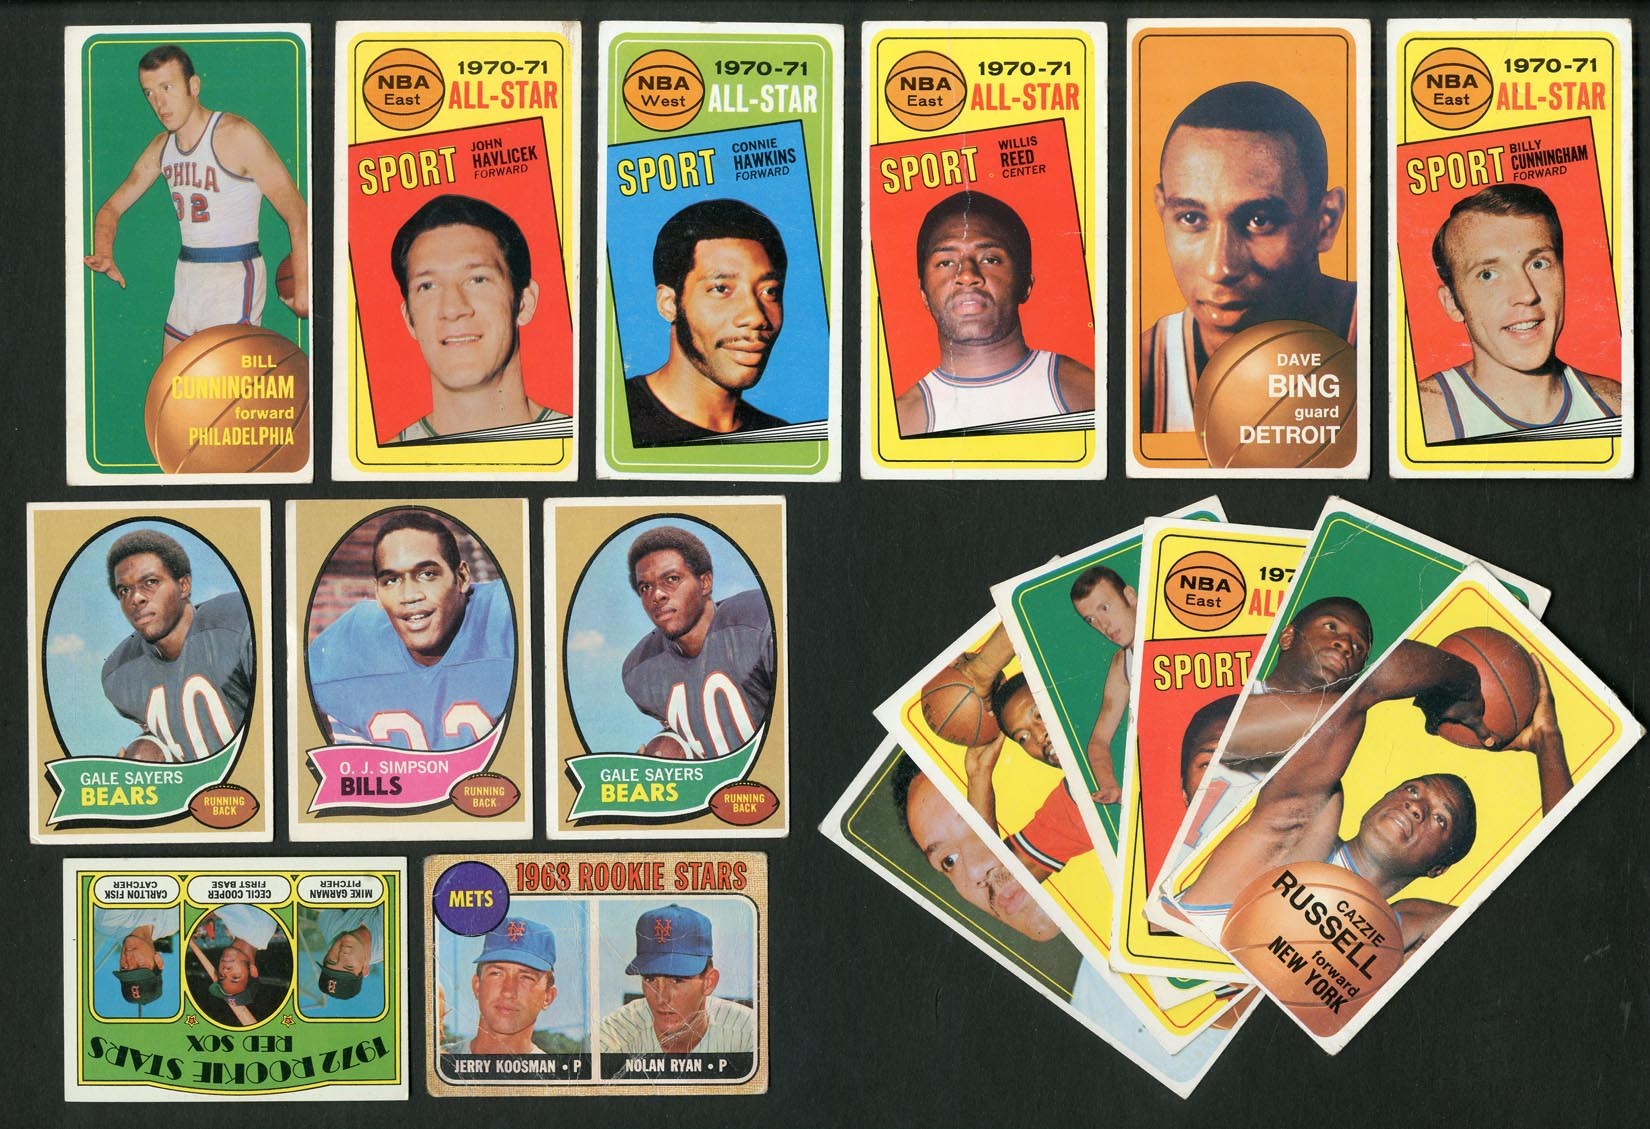 Baseball and Trading Cards - 1920s-70s Multi-Sport Collection with Major Stars and Rookies (1000+)